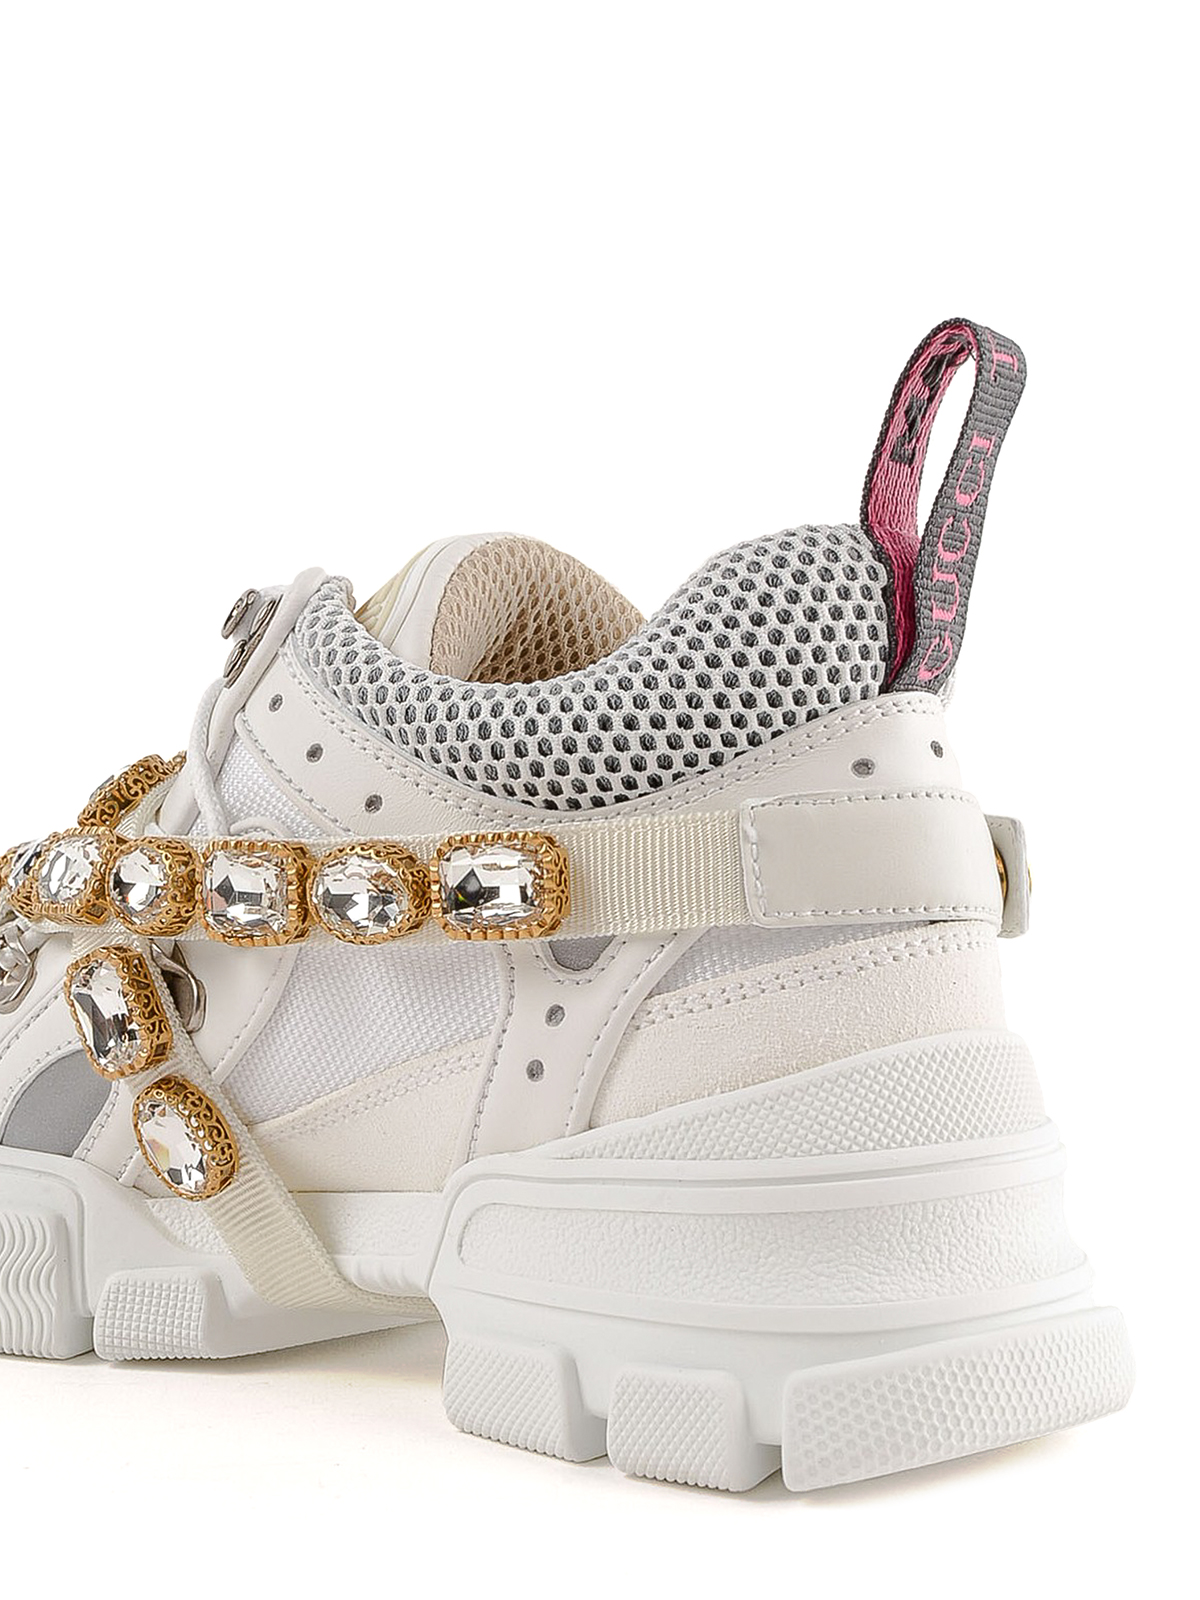 gucci flashtrek sneaker with removable crystals replica